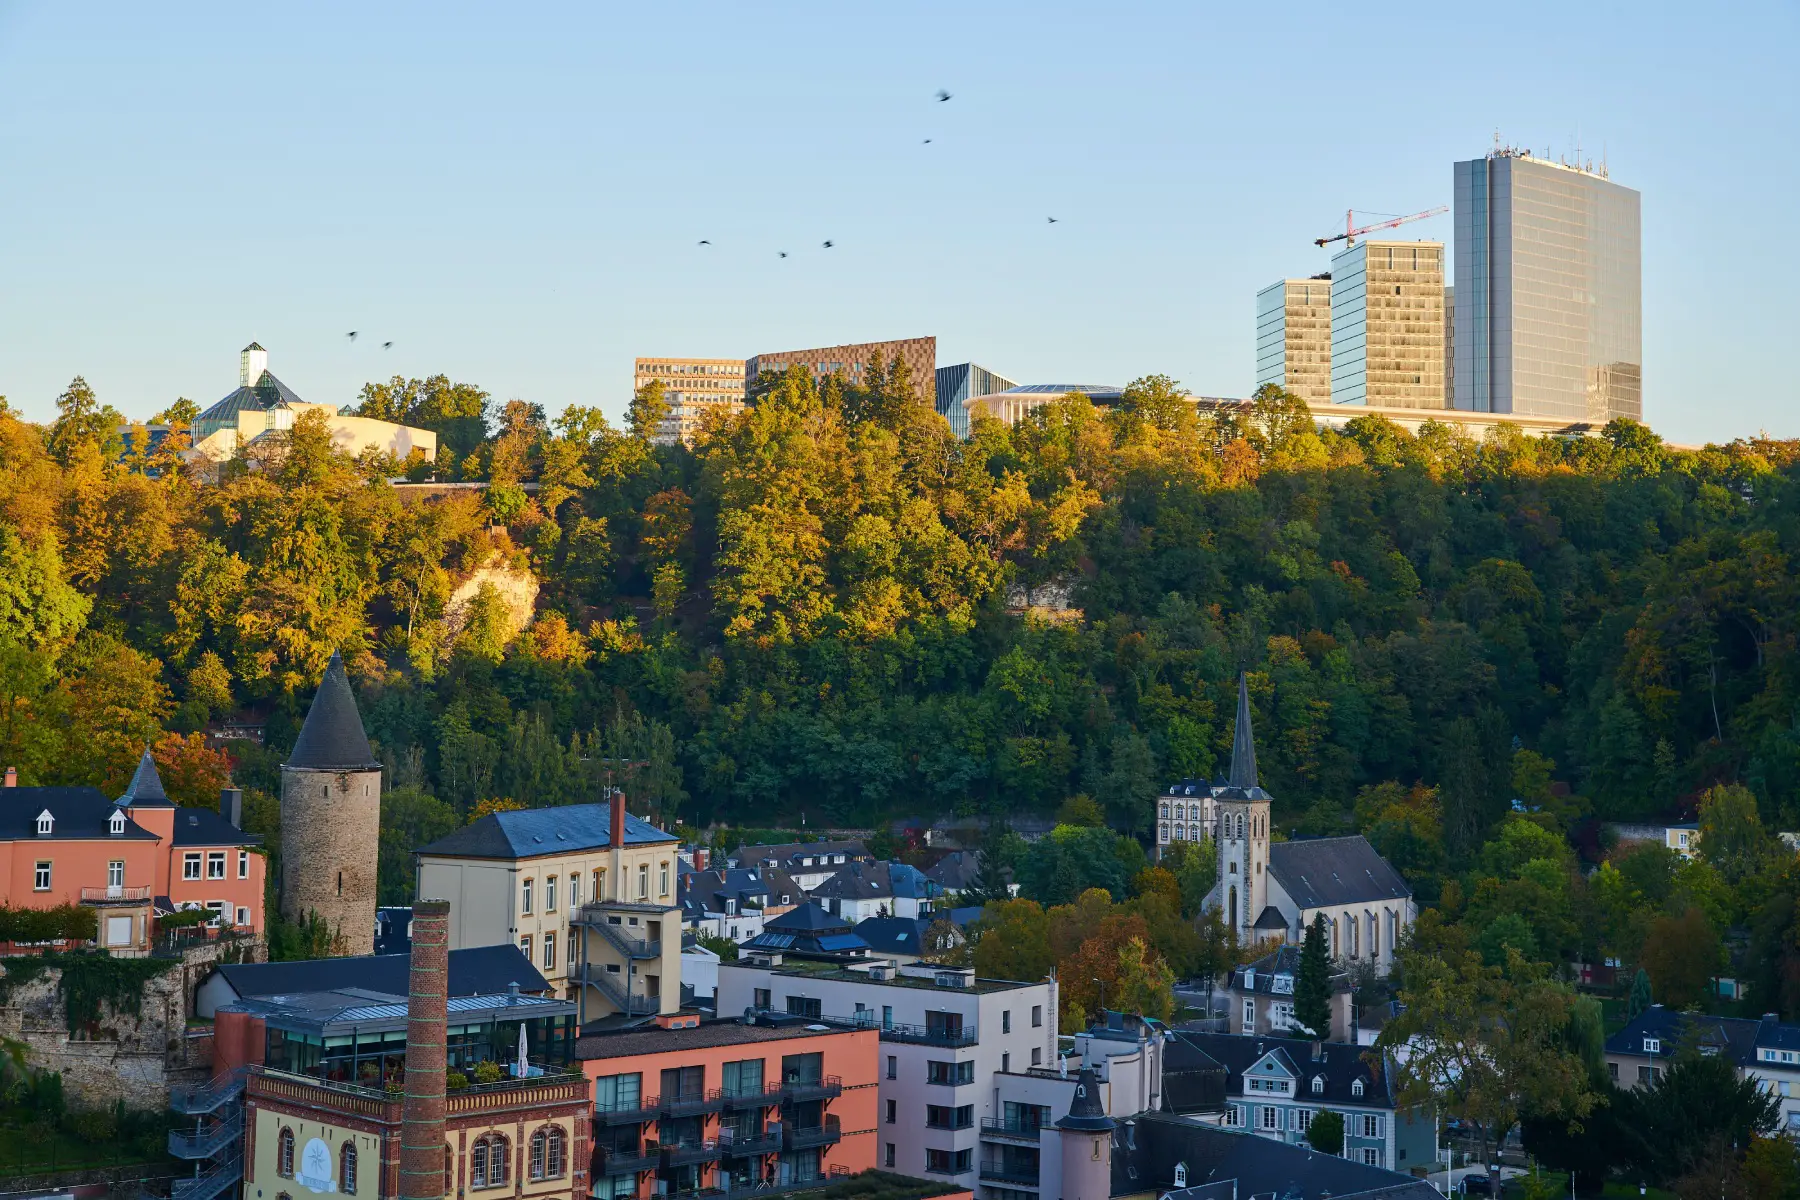 A landscape view of the sun setting over Luxembourg City, with tall buildings in the background